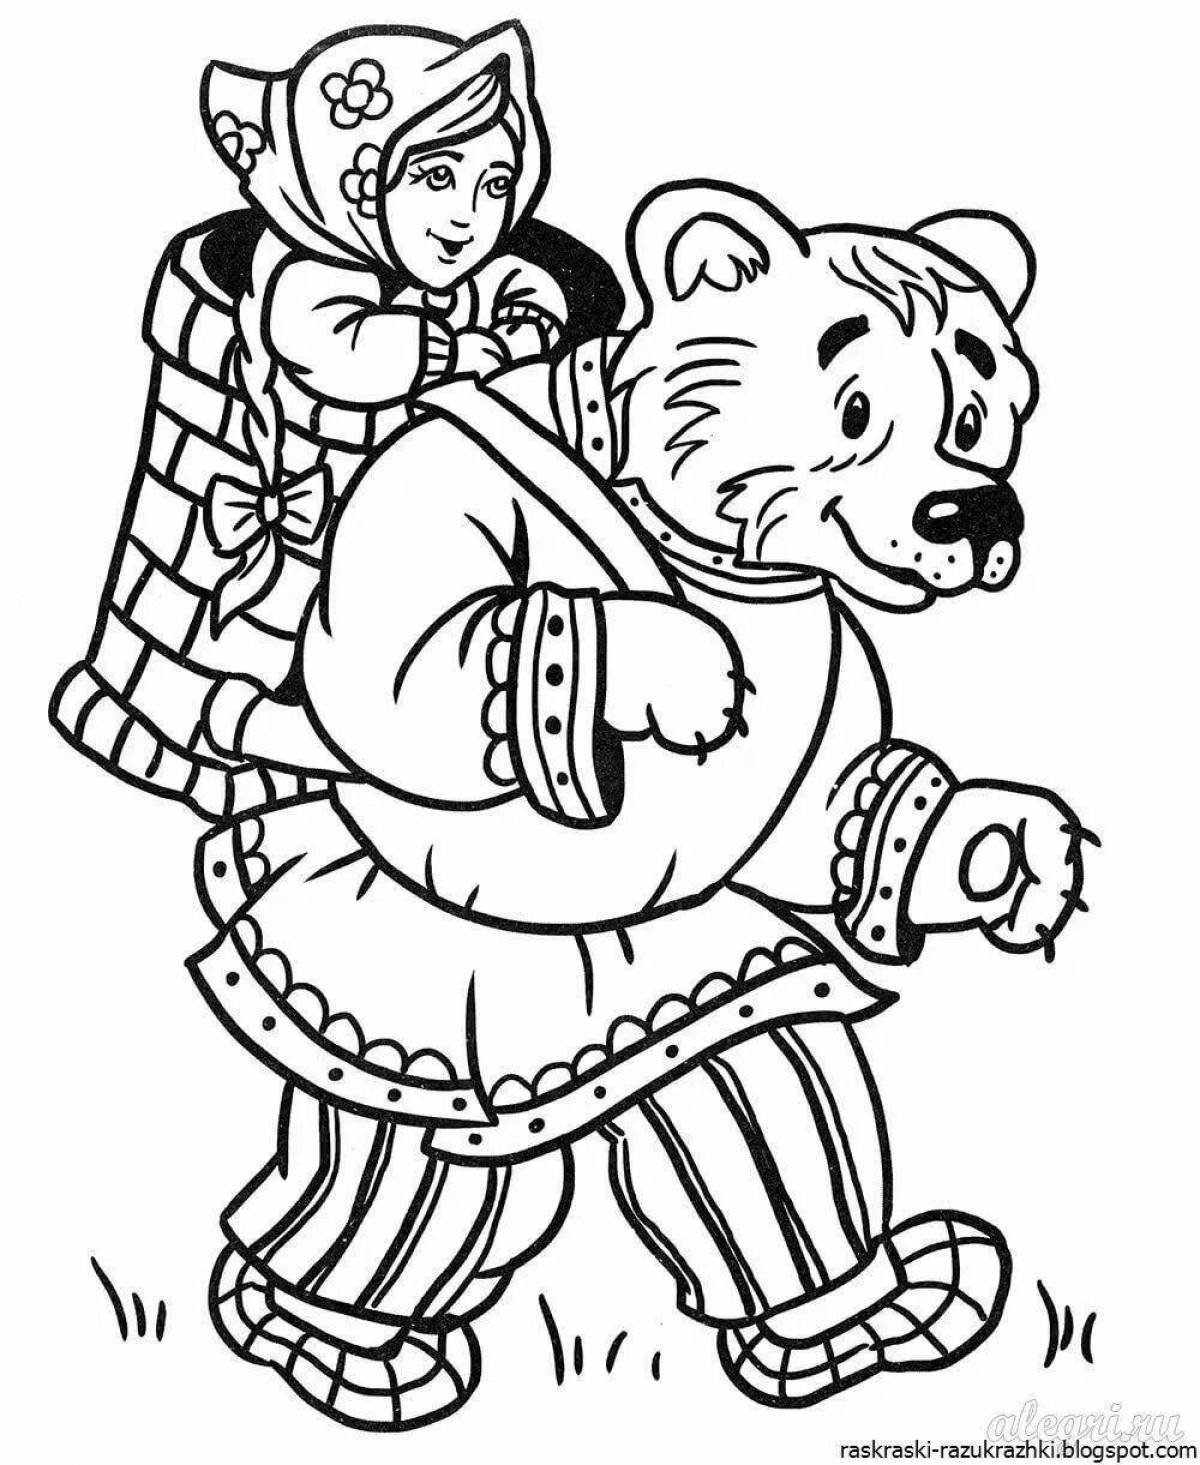 Playful coloring book heroes of fairy tales